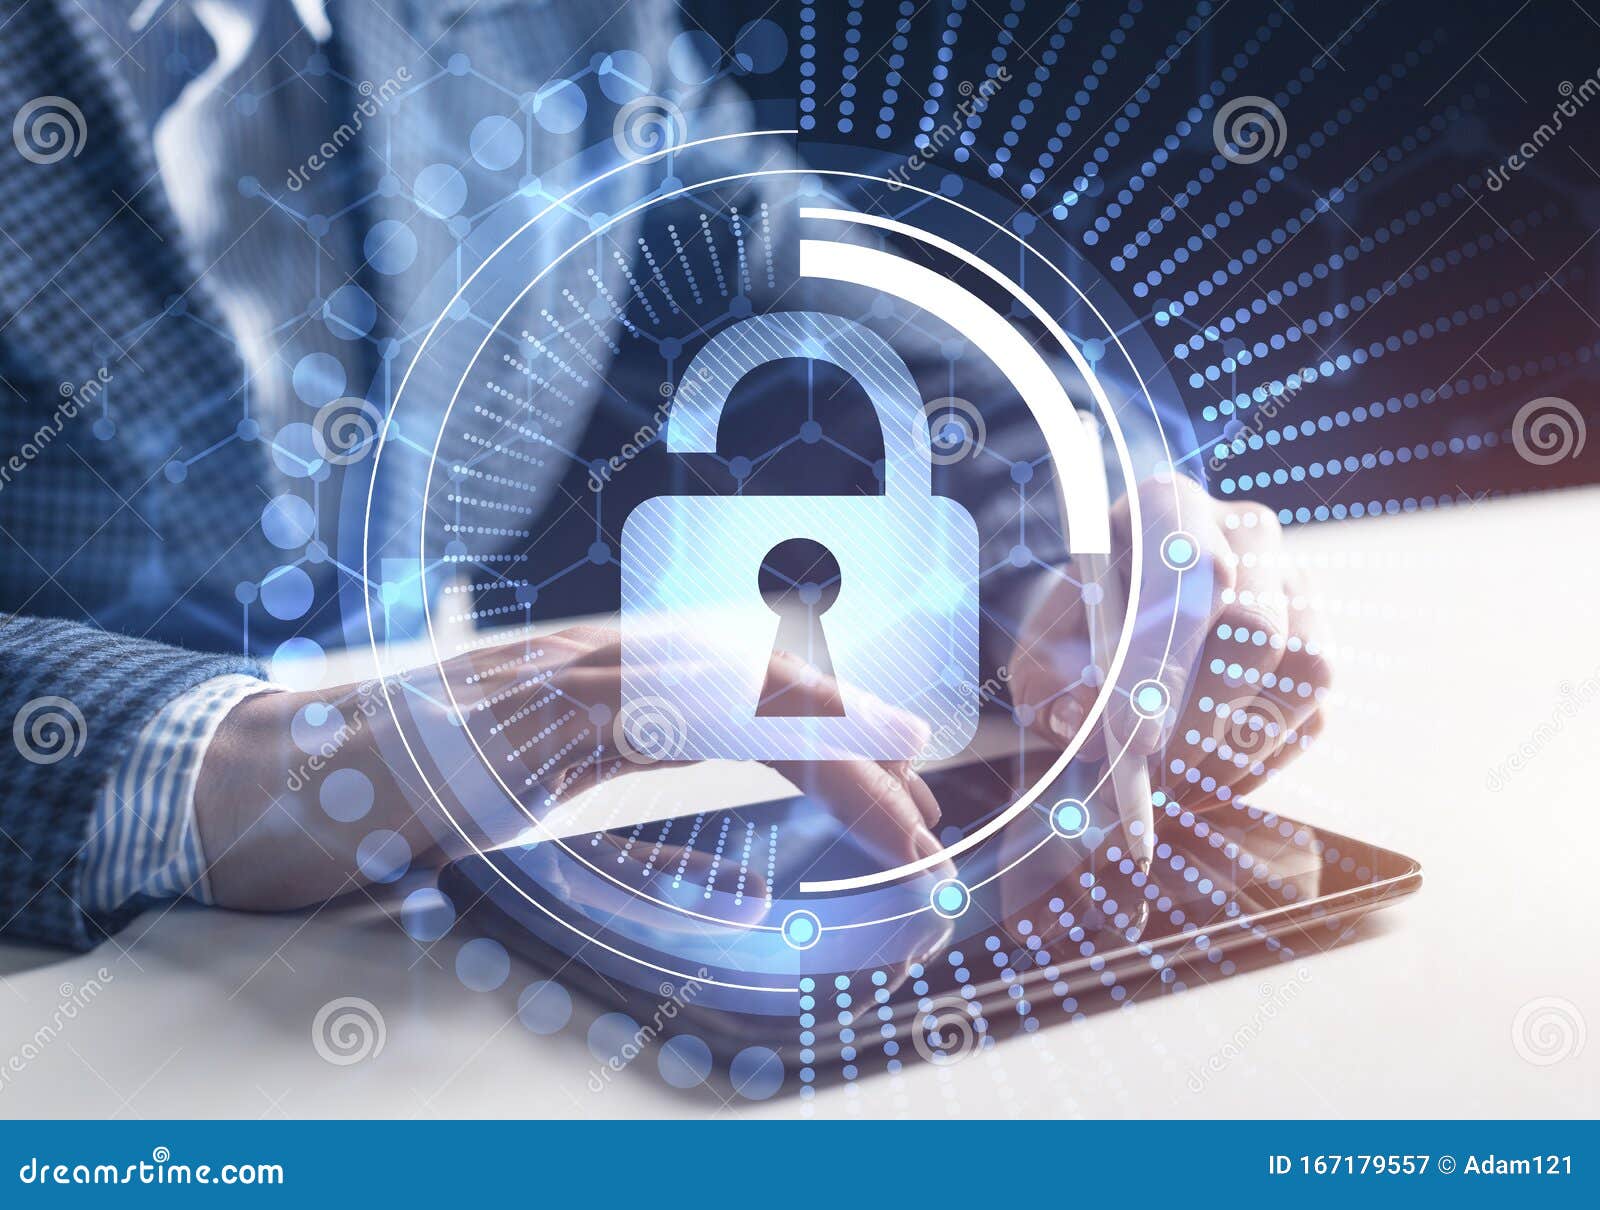 computer security and information technology stock image - image of project, network: 167179557